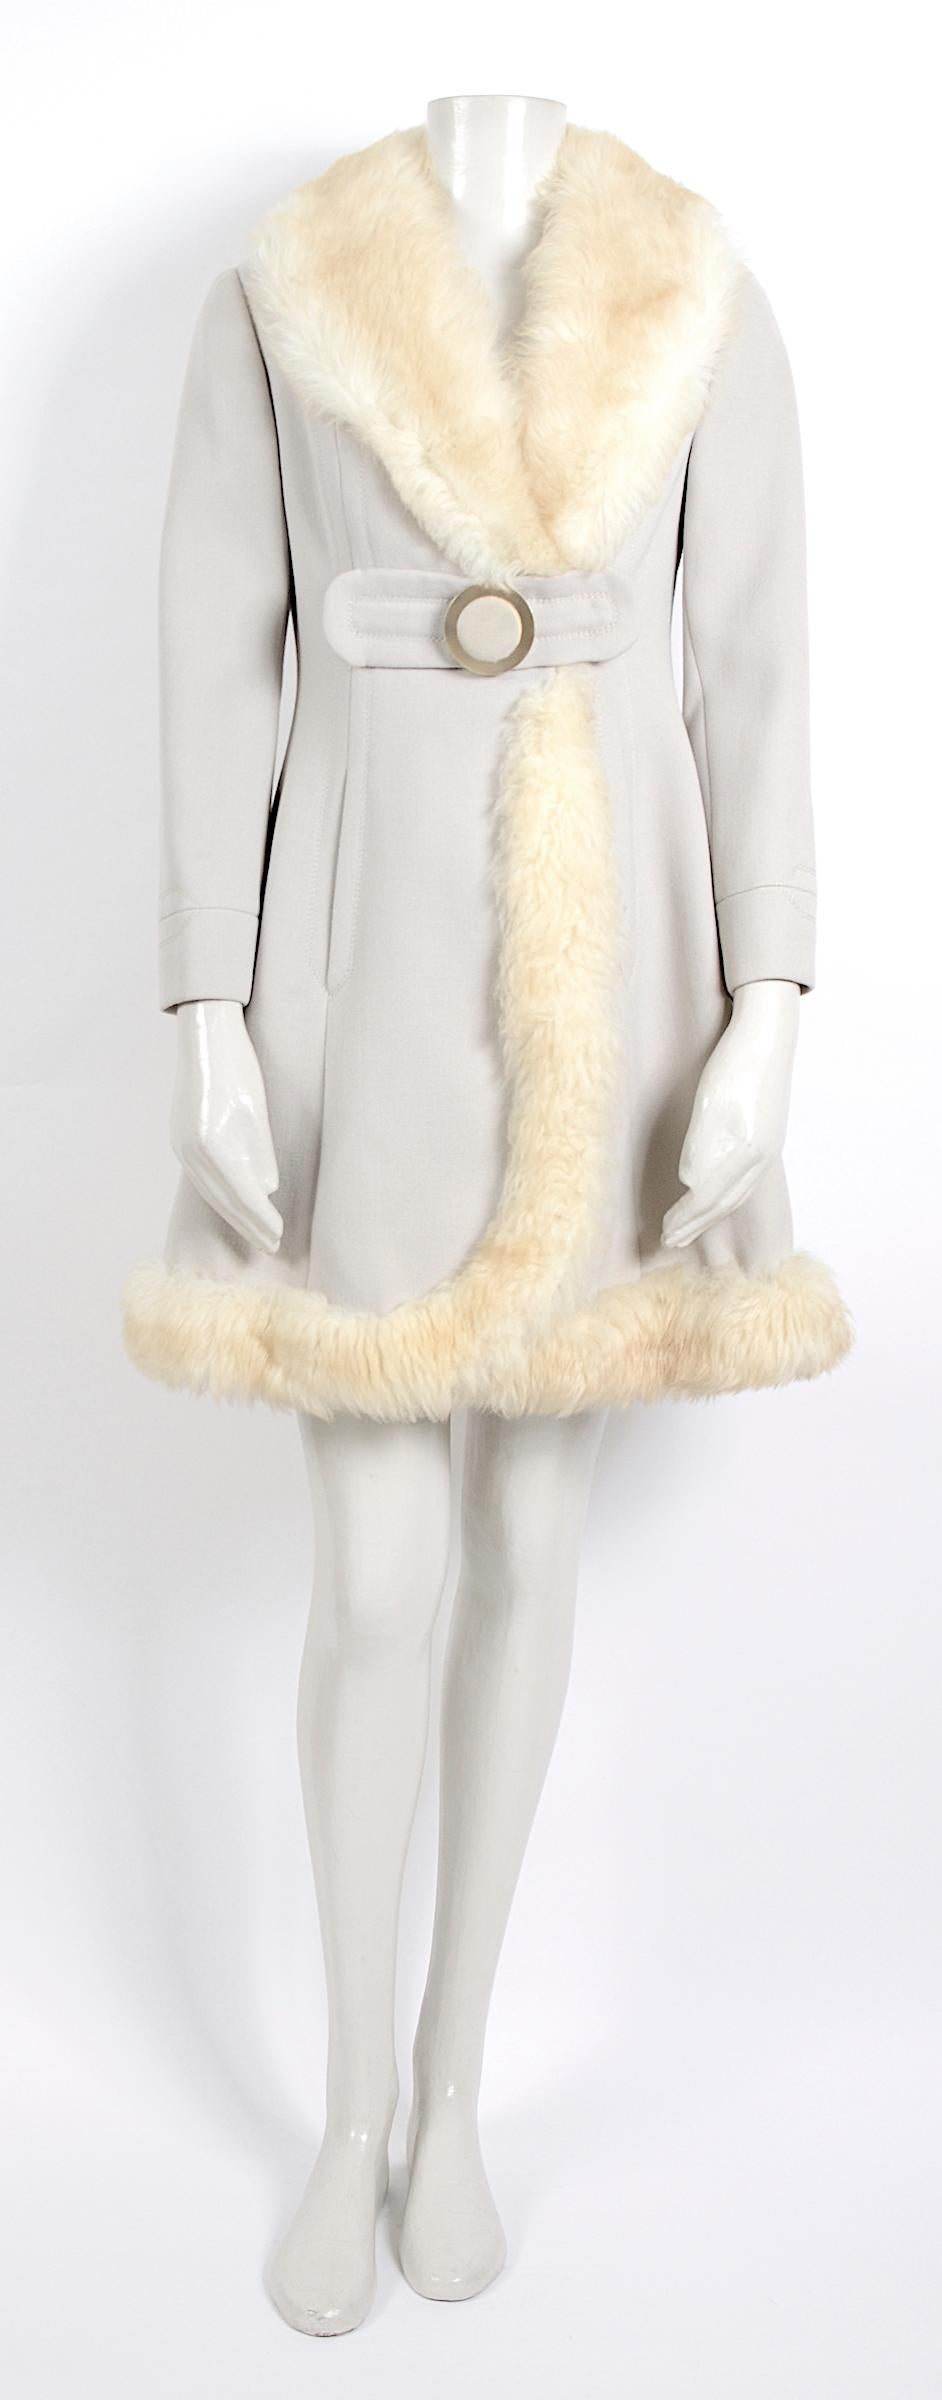 Pierre Balmain boutique early 60s coat, made in wool, trimmed with shearling. Fully lined in beautiful vintage condition.
Please go by the measurements are taken flat.
Sh to Sh 15inch/38cm - Ua to Ua 17inch/44cm(x2) - Waist 16inch/41cm(x2) - Sleeve